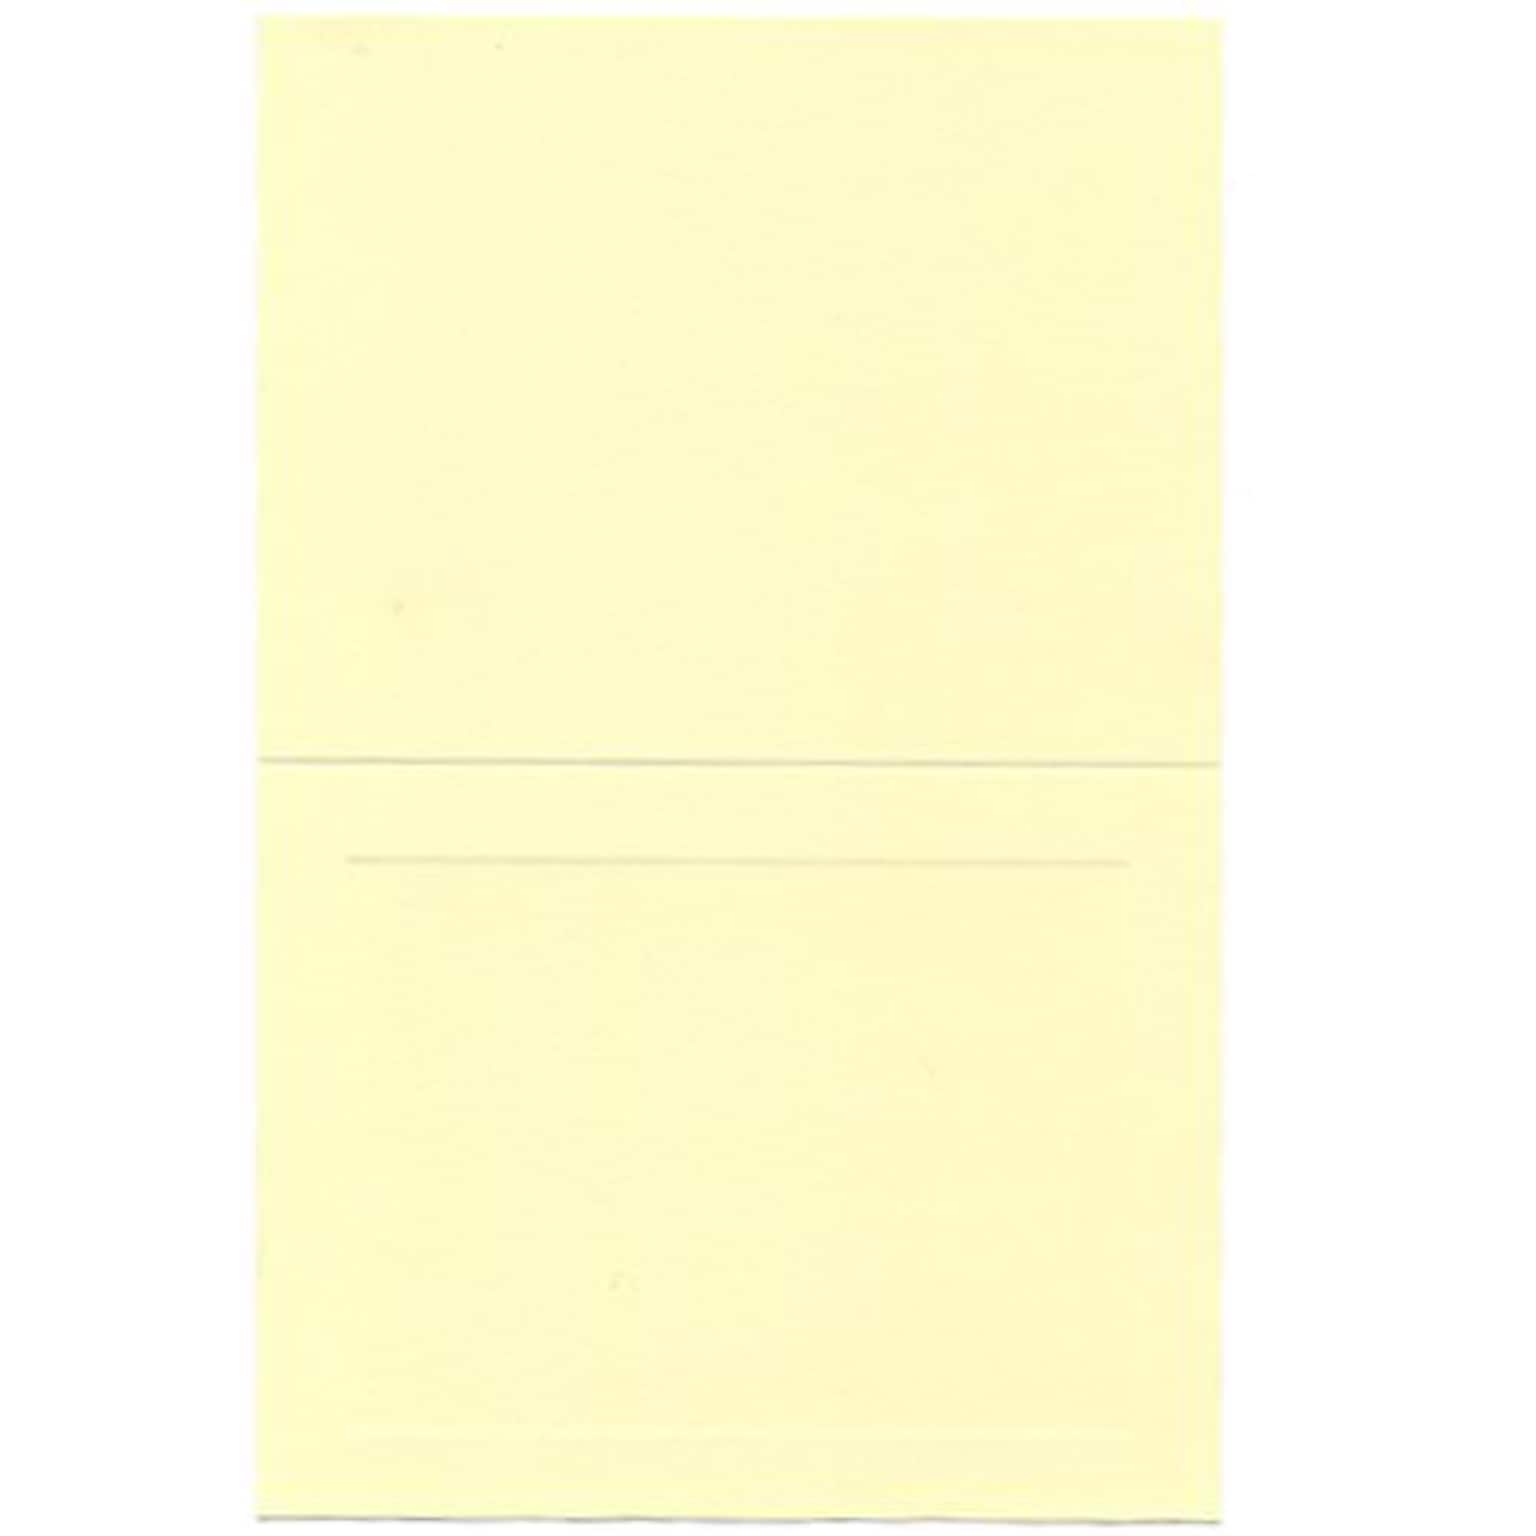 JAM Paper® Blank Foldover Cards, A2 size, 4 3/8 x 5 7/16, Ivory Panel, 100/pack (309914)